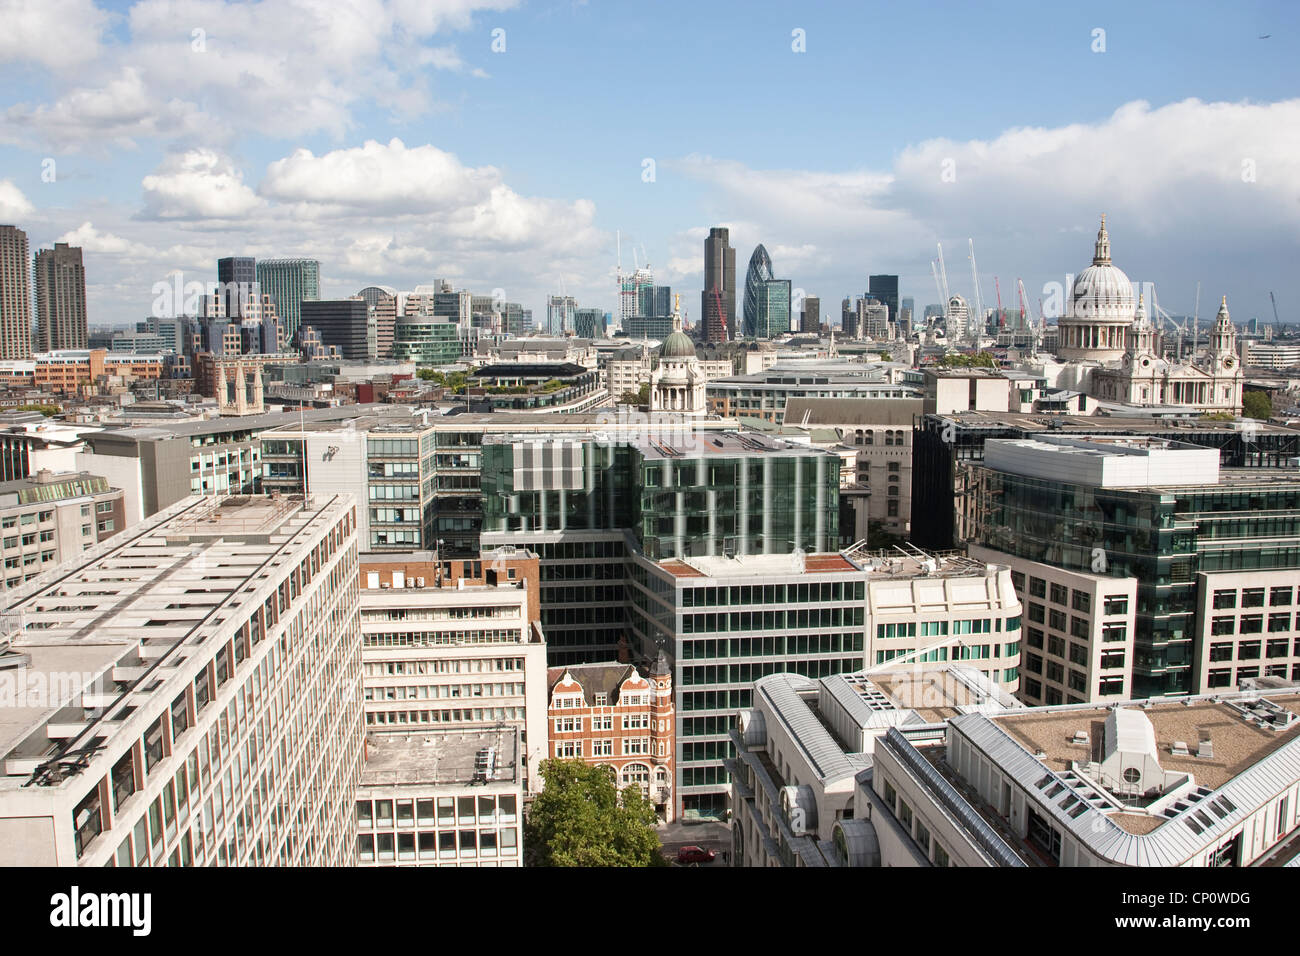 Wide-angle Cityscape across the skyline of the City of London, showing the financial district in the distance, England, UK Stock Photo